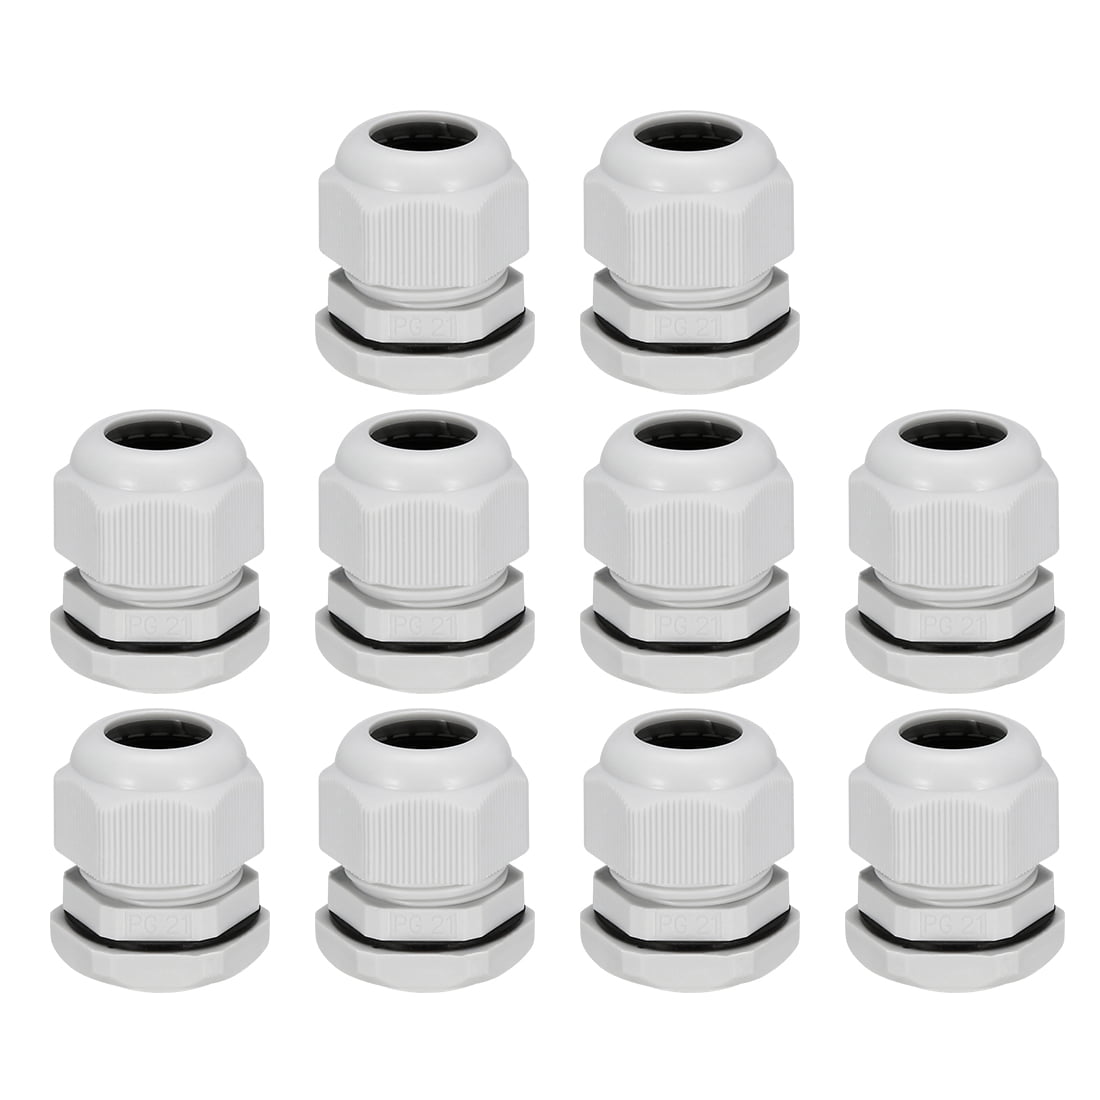 uxcell 8Pcs PG29 Cable Gland Waterproof Plastic Joint Adjustable Locknut Black for 18mm-25mm Dia Cable Wire